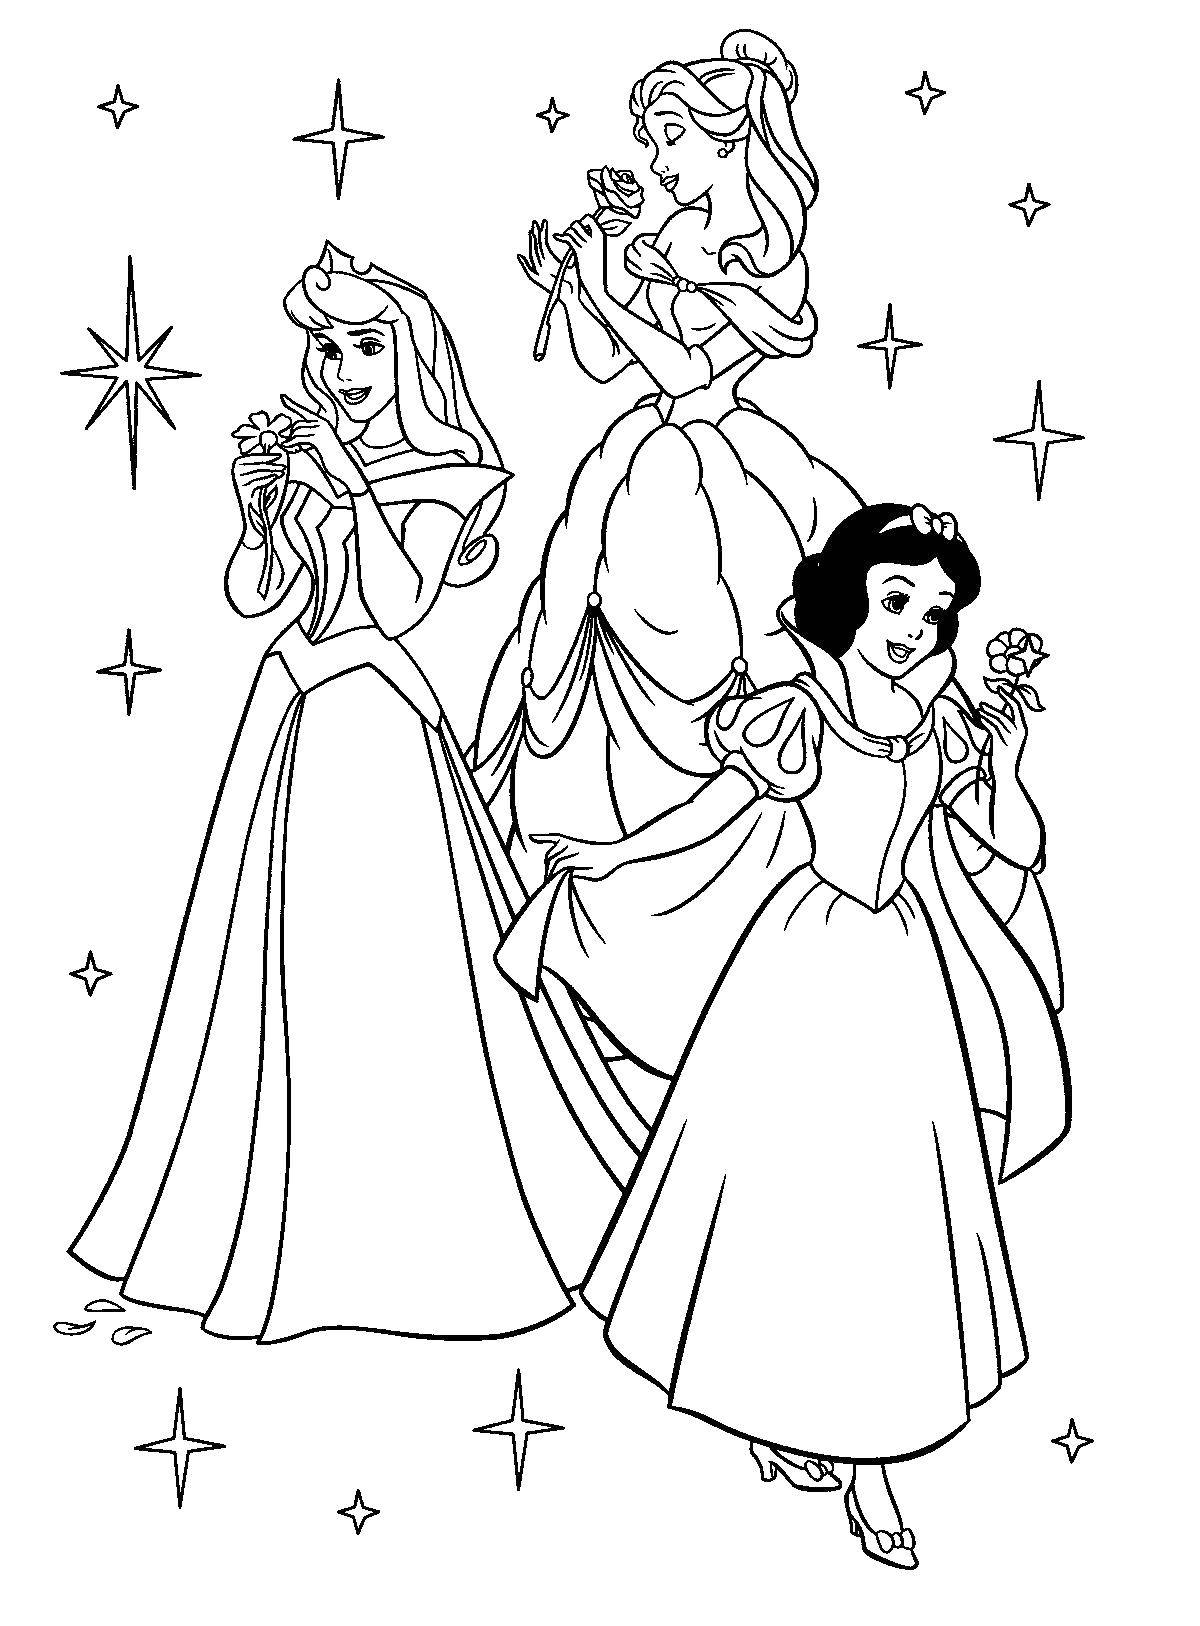 Coloring Sleeping beauty, Belle and snow white. Category Cartoon character. Tags:  Disney, Sleeping beauty, Belle, Snow white.